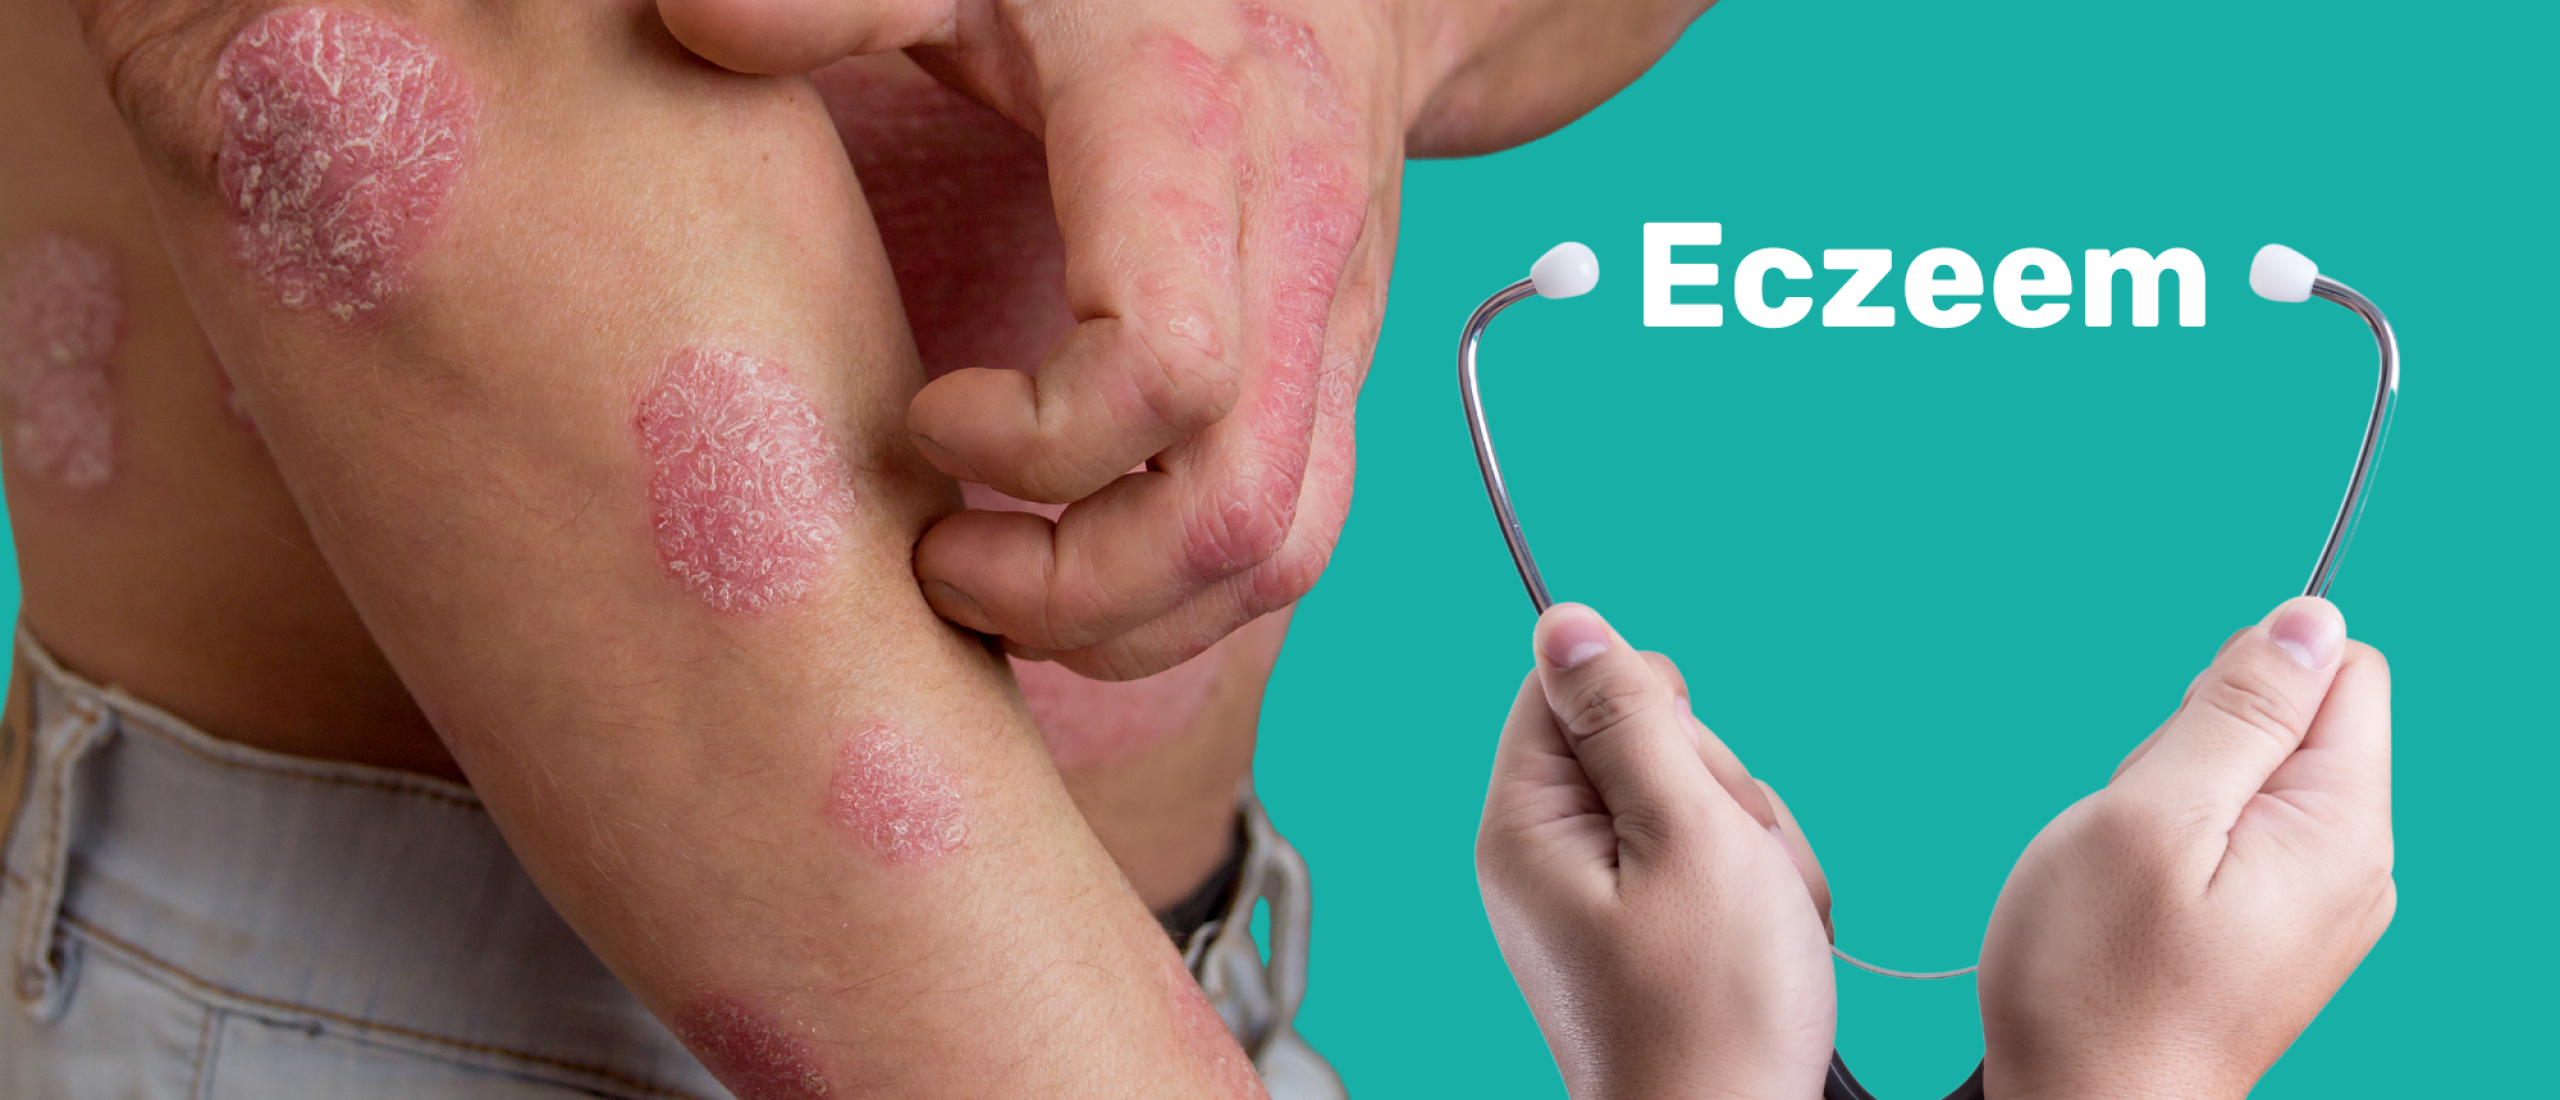 The importance of biomarker testing in eczema treatment